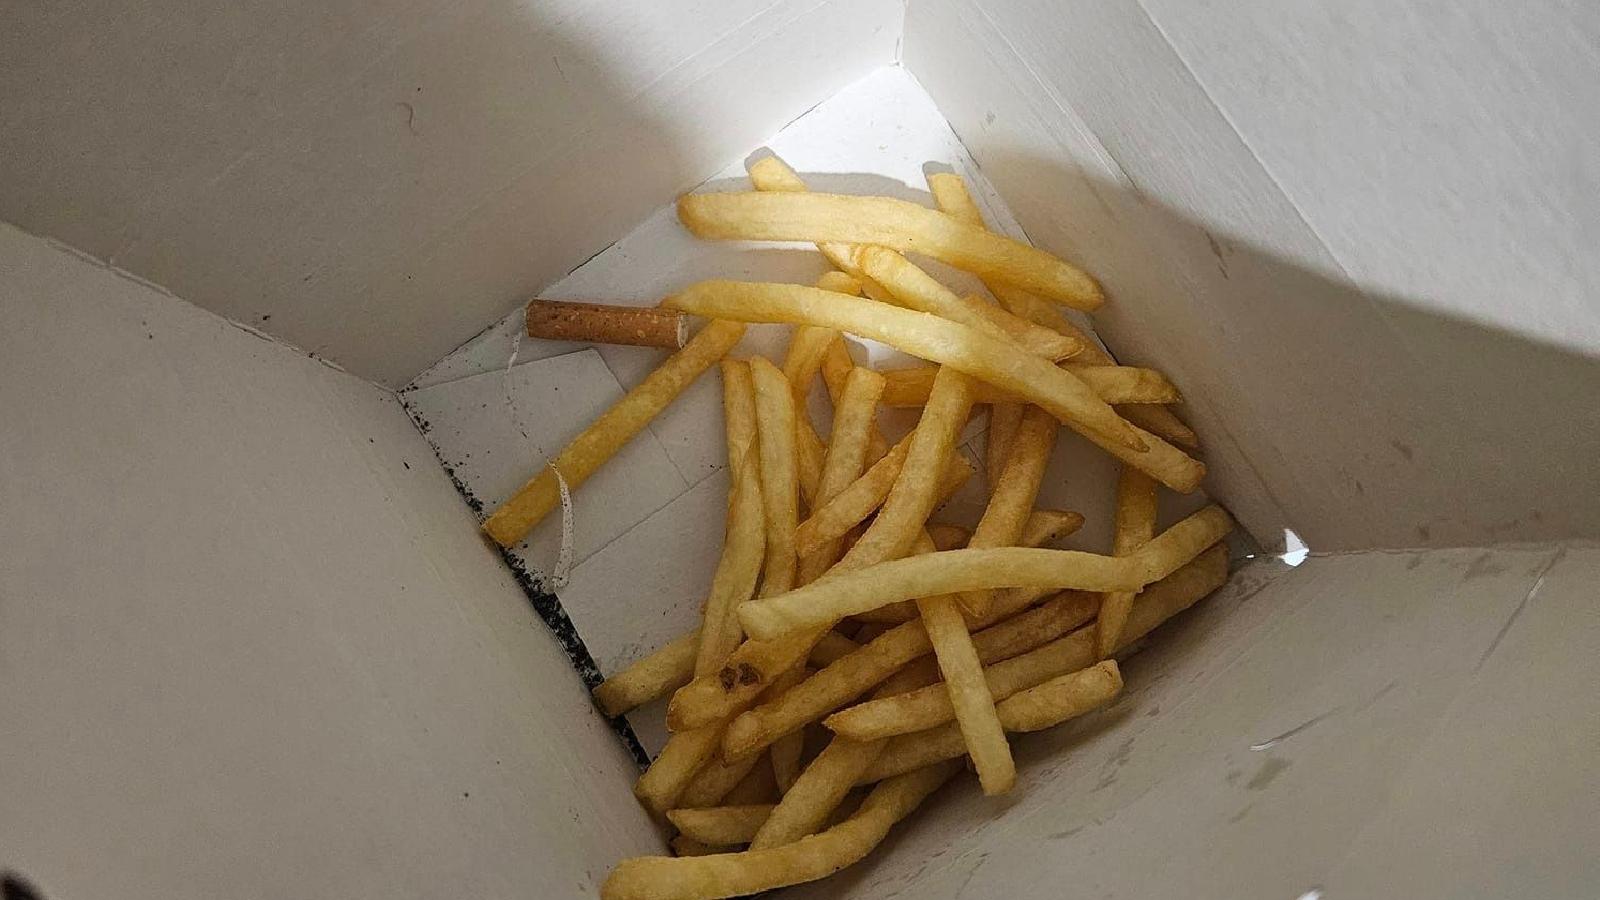 Image shows a cigarette butt found in a McDonald's Happy Meal